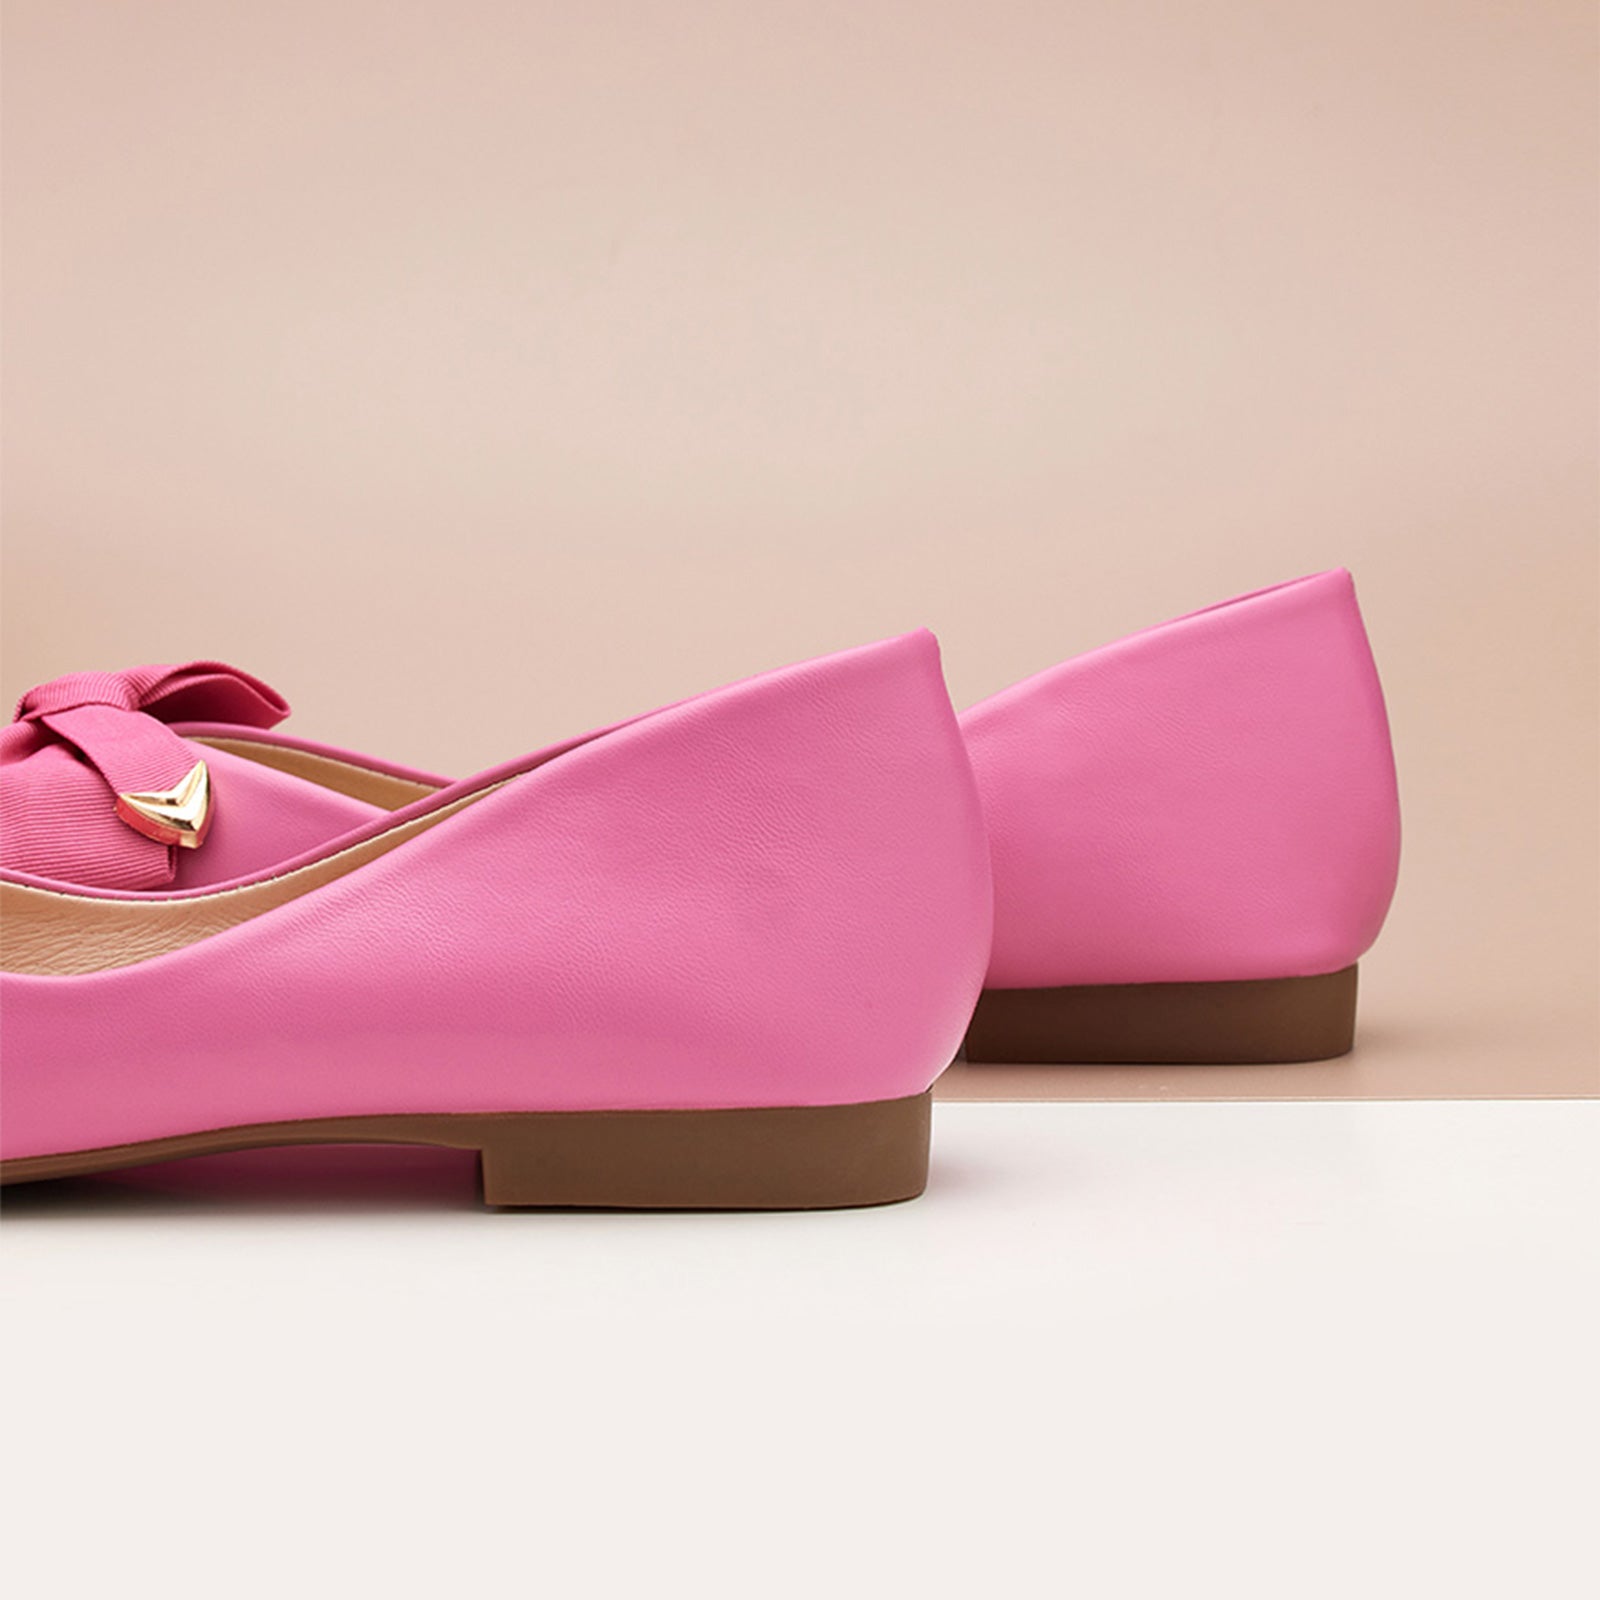 Stylish Hot Pink Square Flats with Bow Embellishment